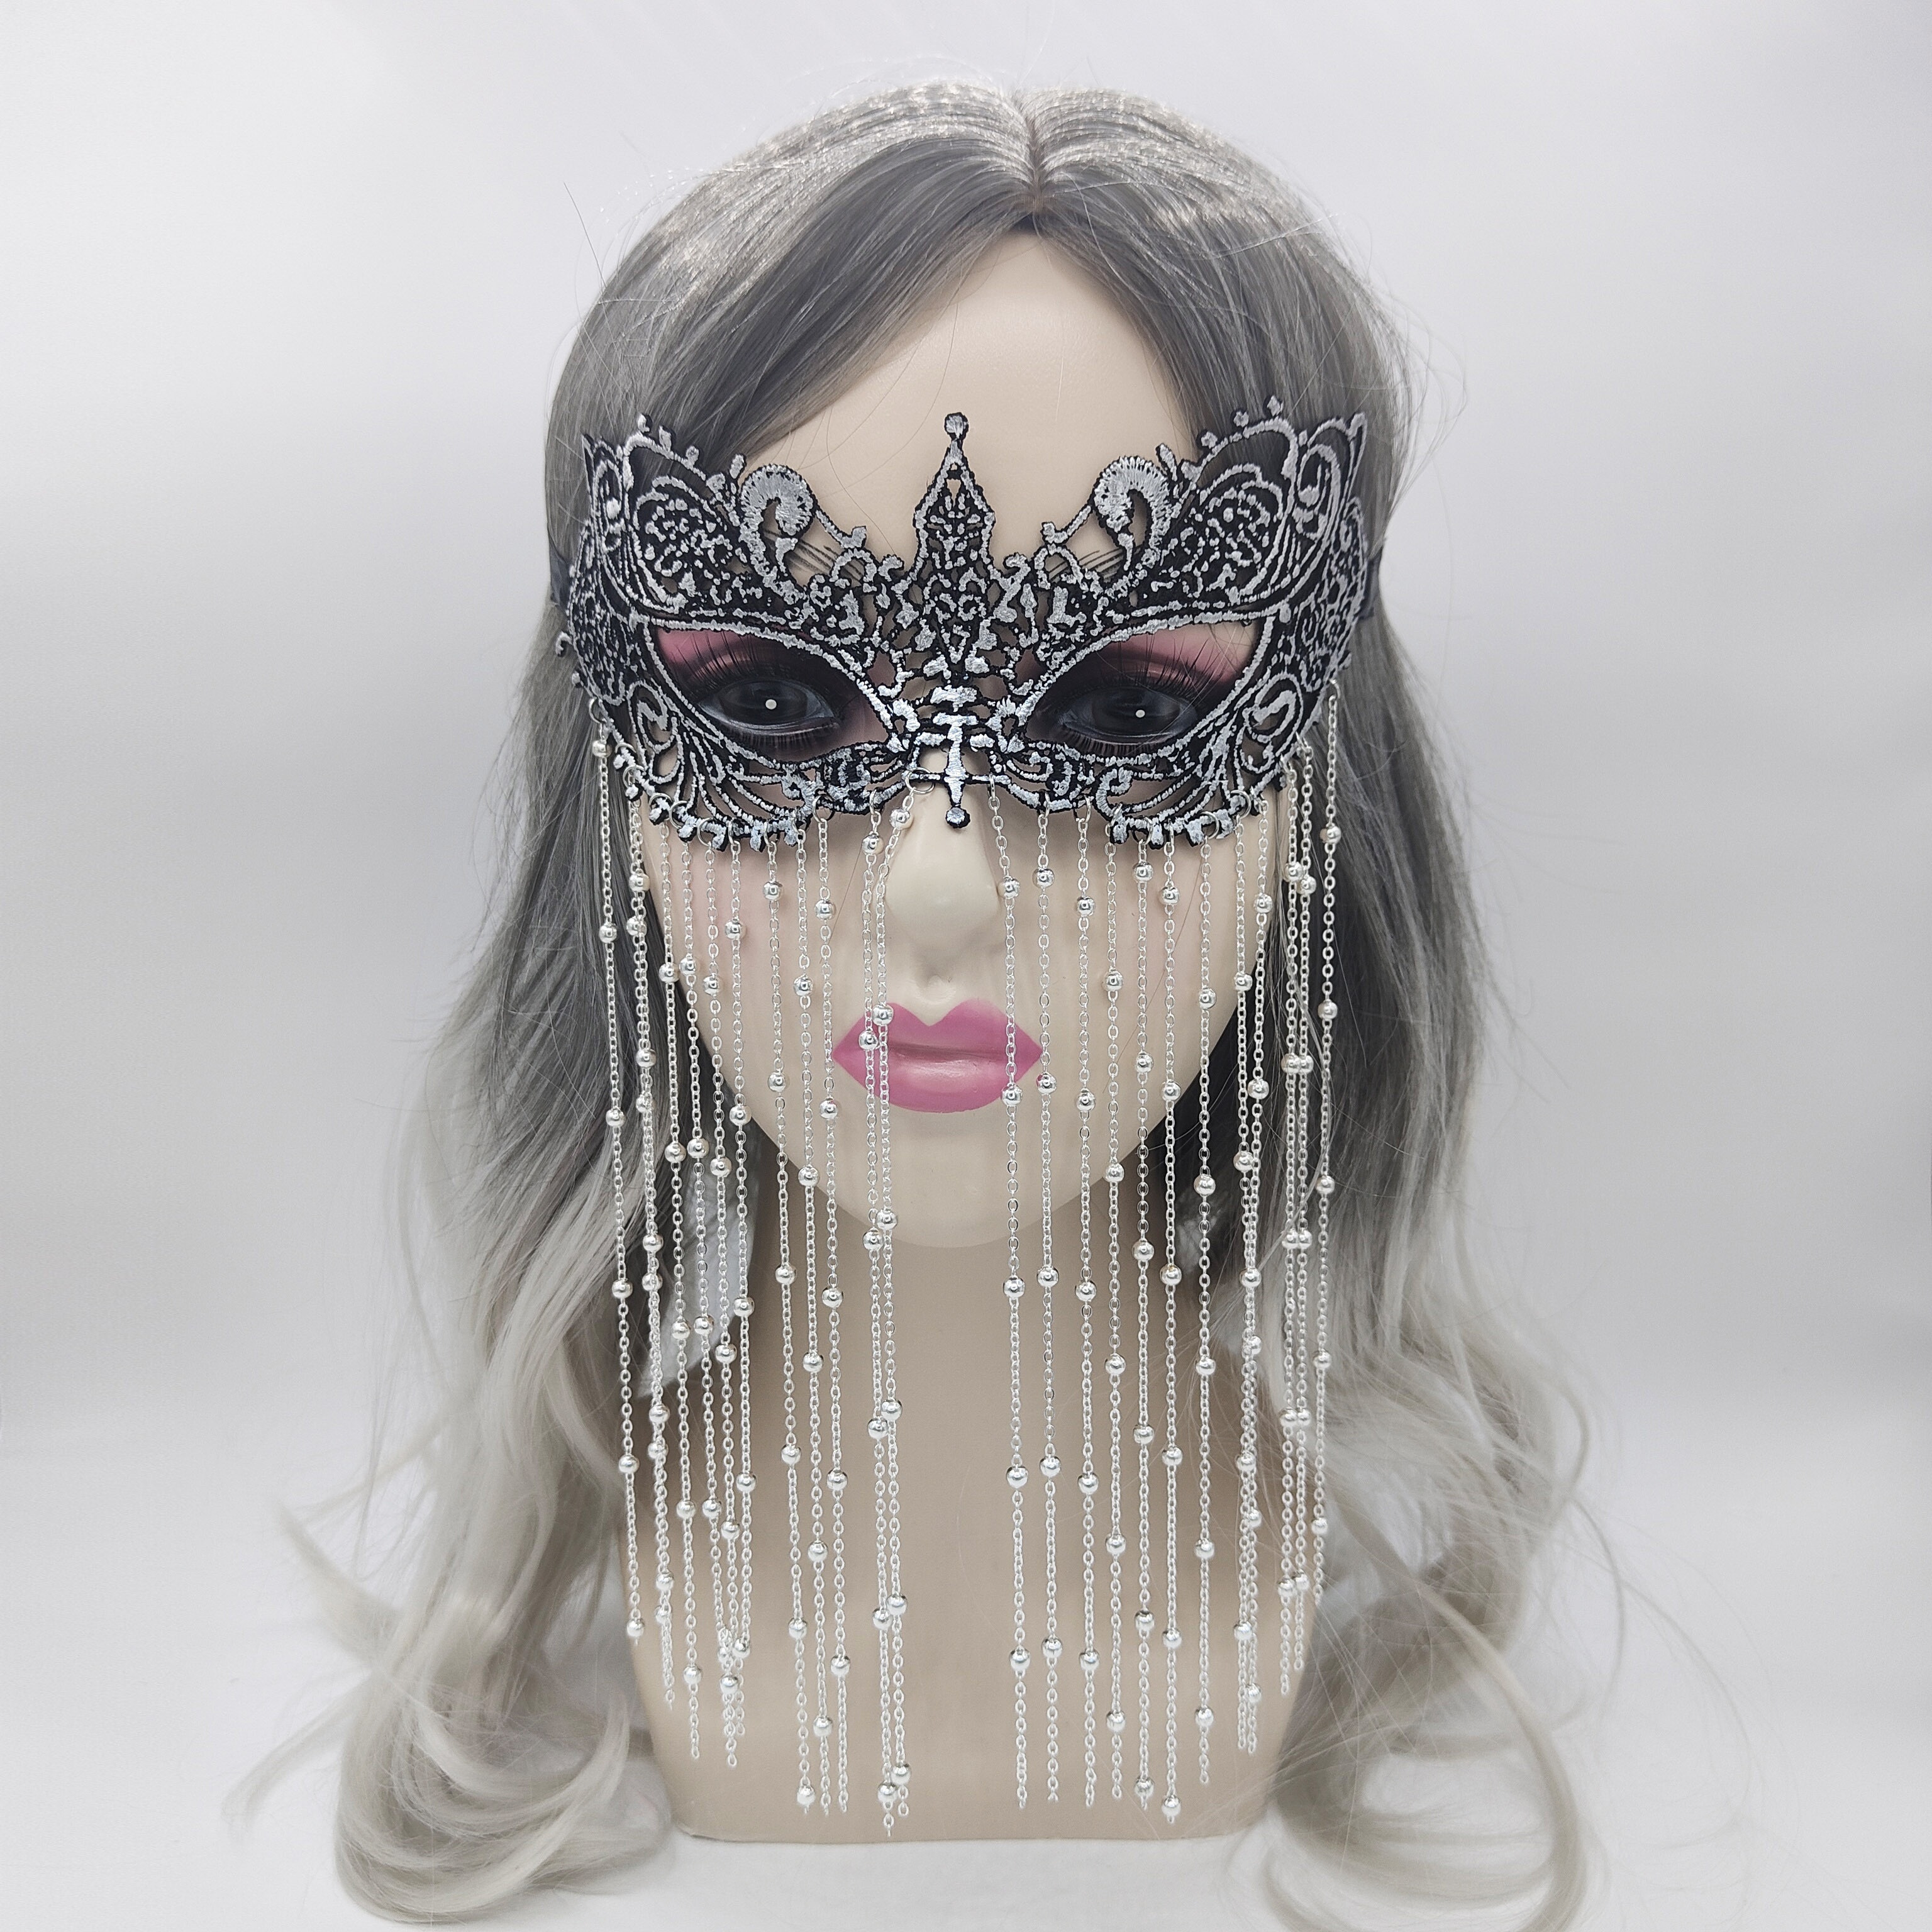 New Full Face Lace Metal Masquerade Mask Silver